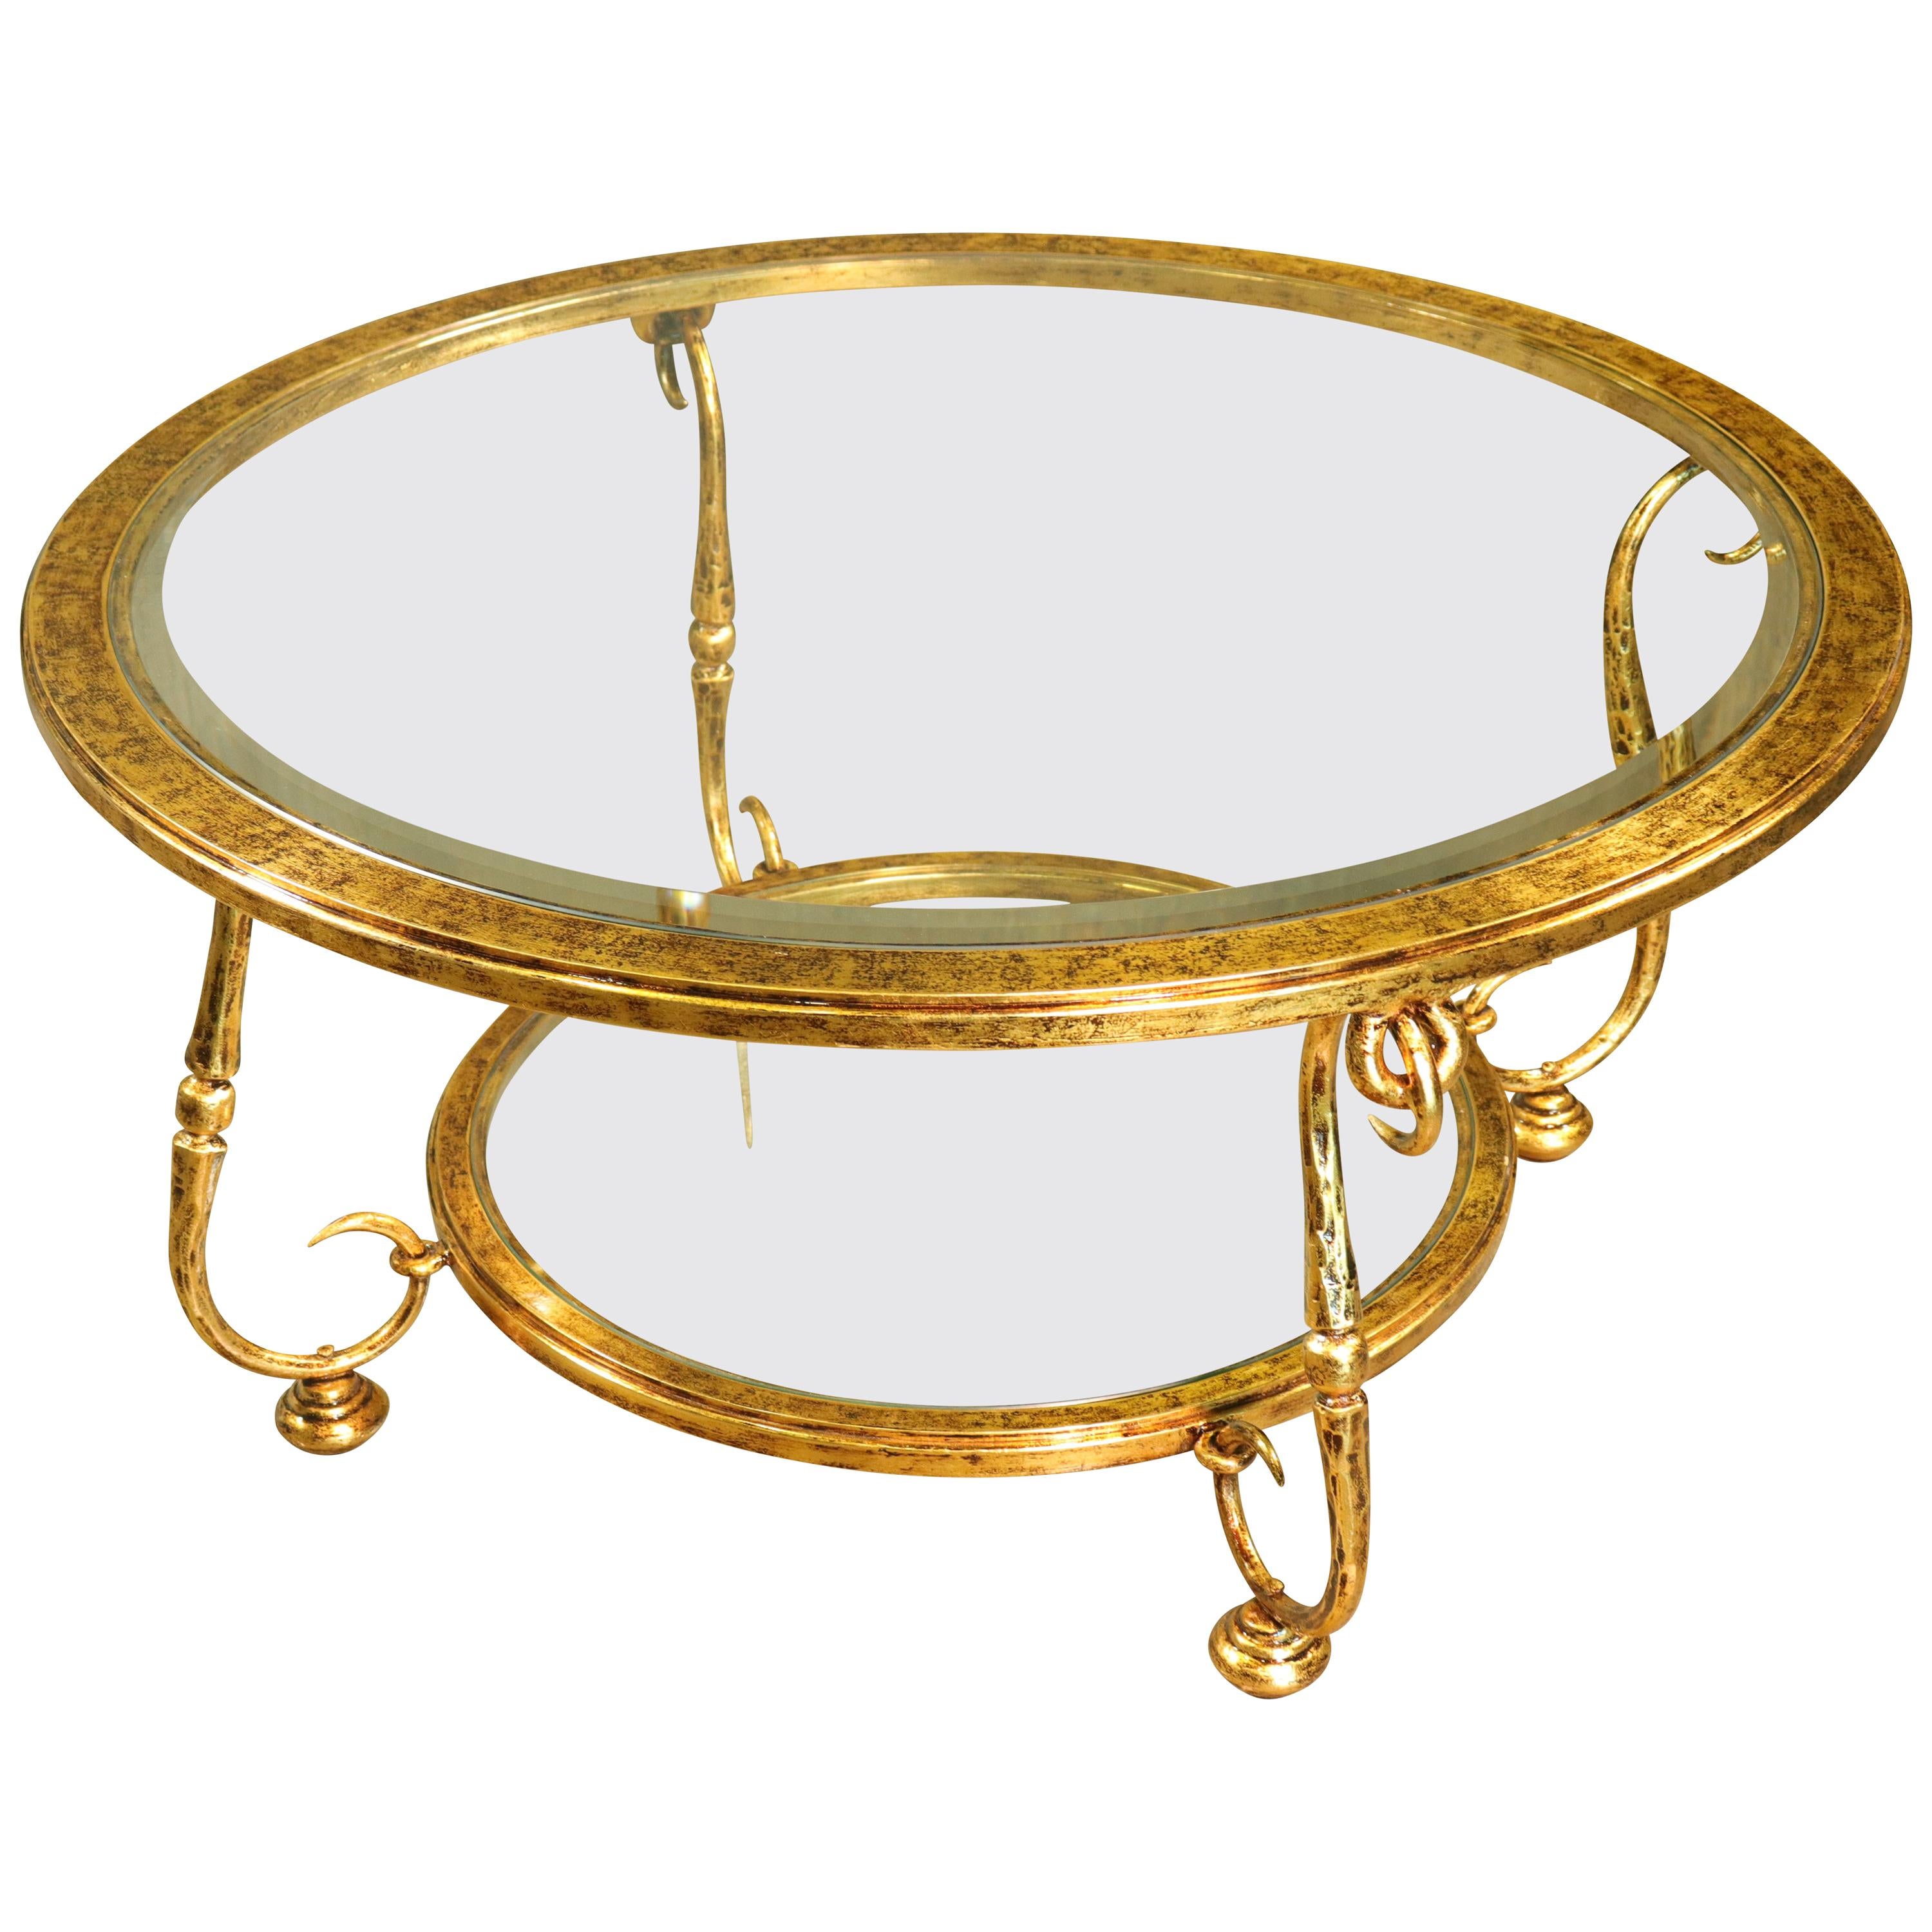 Louis XIV Style Designer Venetian Gilt, Iron, Crystal Scroll Round Coffee Table For Sale